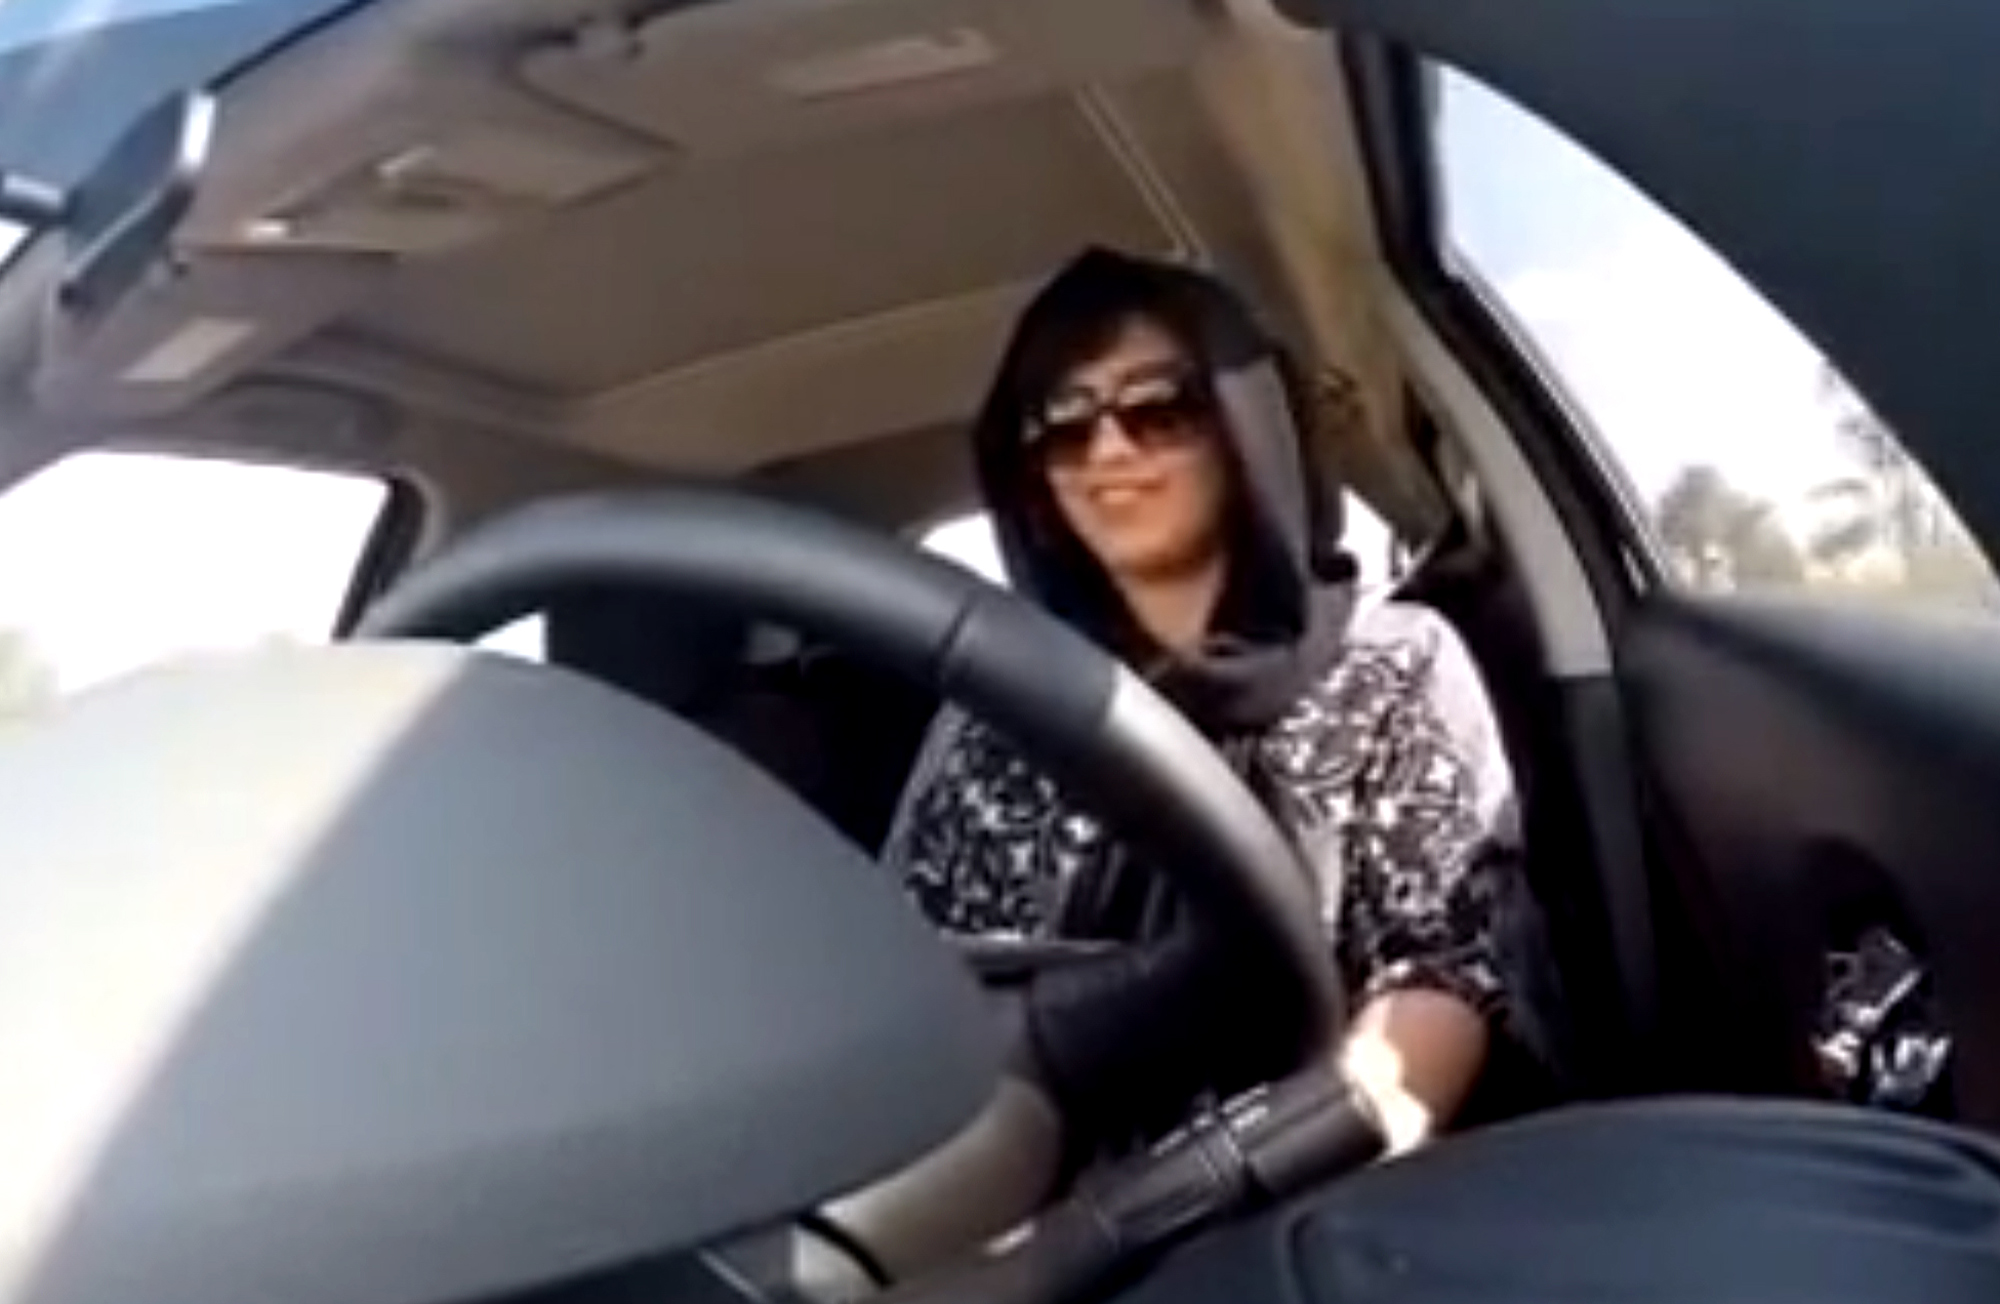 A screenshot from a video released by Loujain al-Hathloul on Nov. 30, 2014, shows her driving towards the United Arab Emirates - Saudi Arabia border before her arrest on Dec. 1, 2014, in Saudi Arabia. (Loujain al-Hathloul—AP)